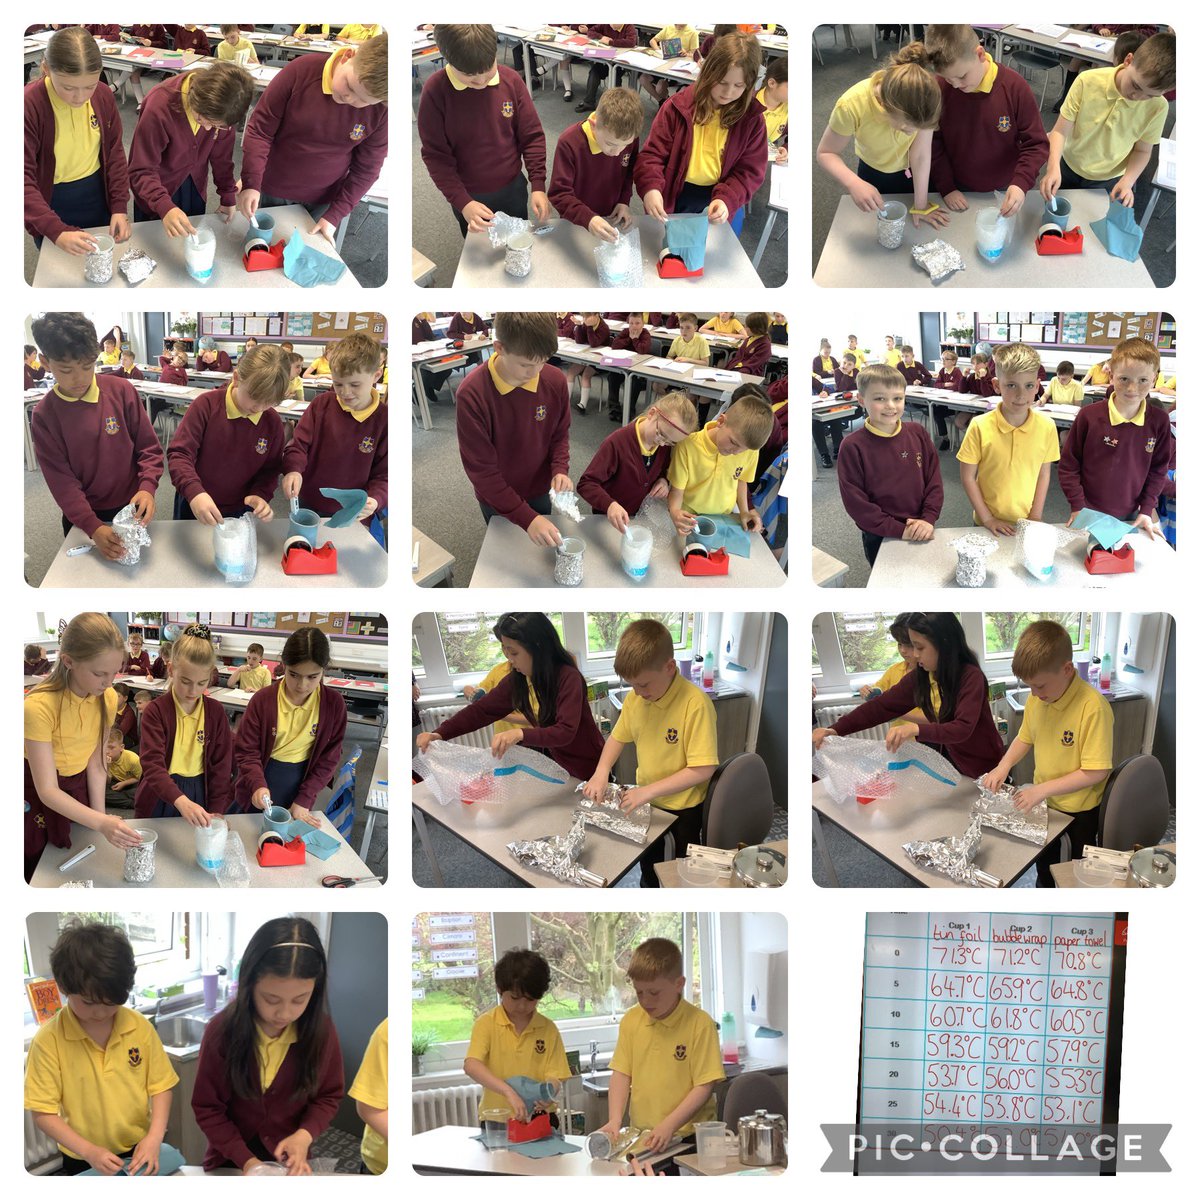 Another science experiment in Year 5 this afternoon where we tested which material would be the best thermal insulator 🧪 #year5 #science #practicallearning